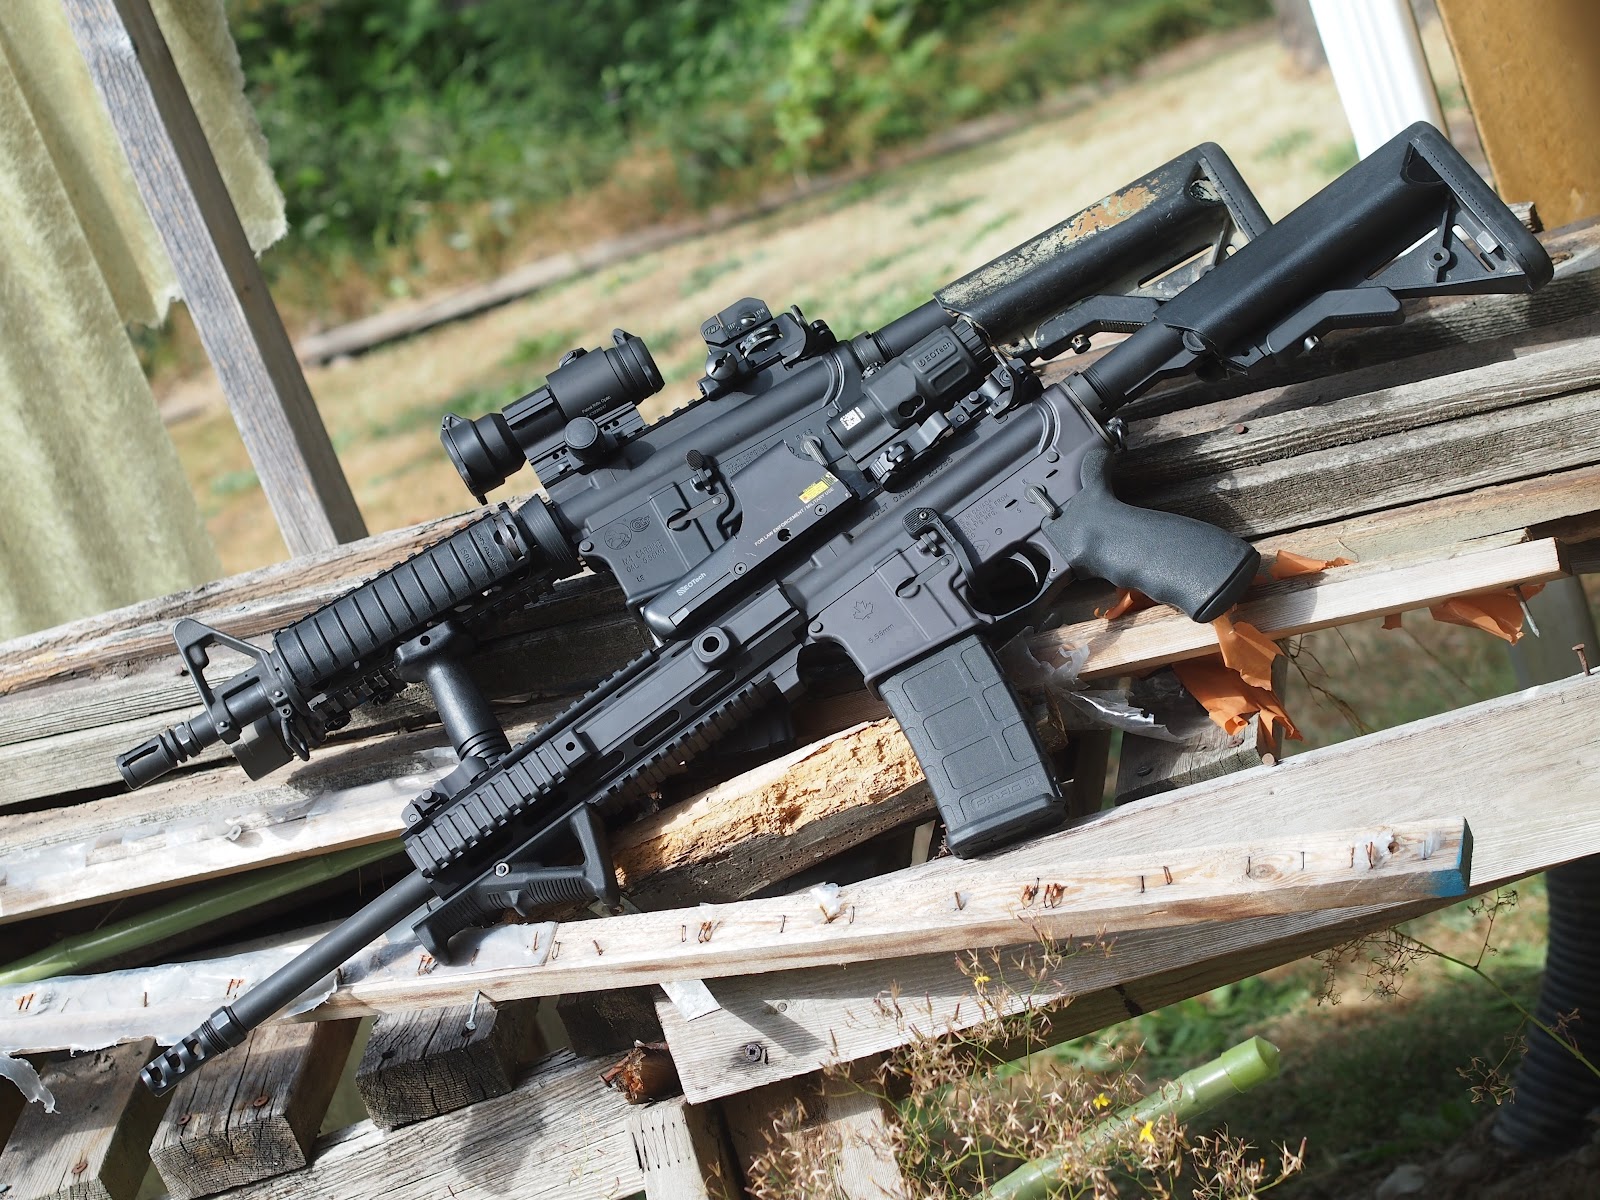 Colt Canada Diemaco C8 C7 L119 Sfw Builders Gallery Page 6 Airsoft Canada